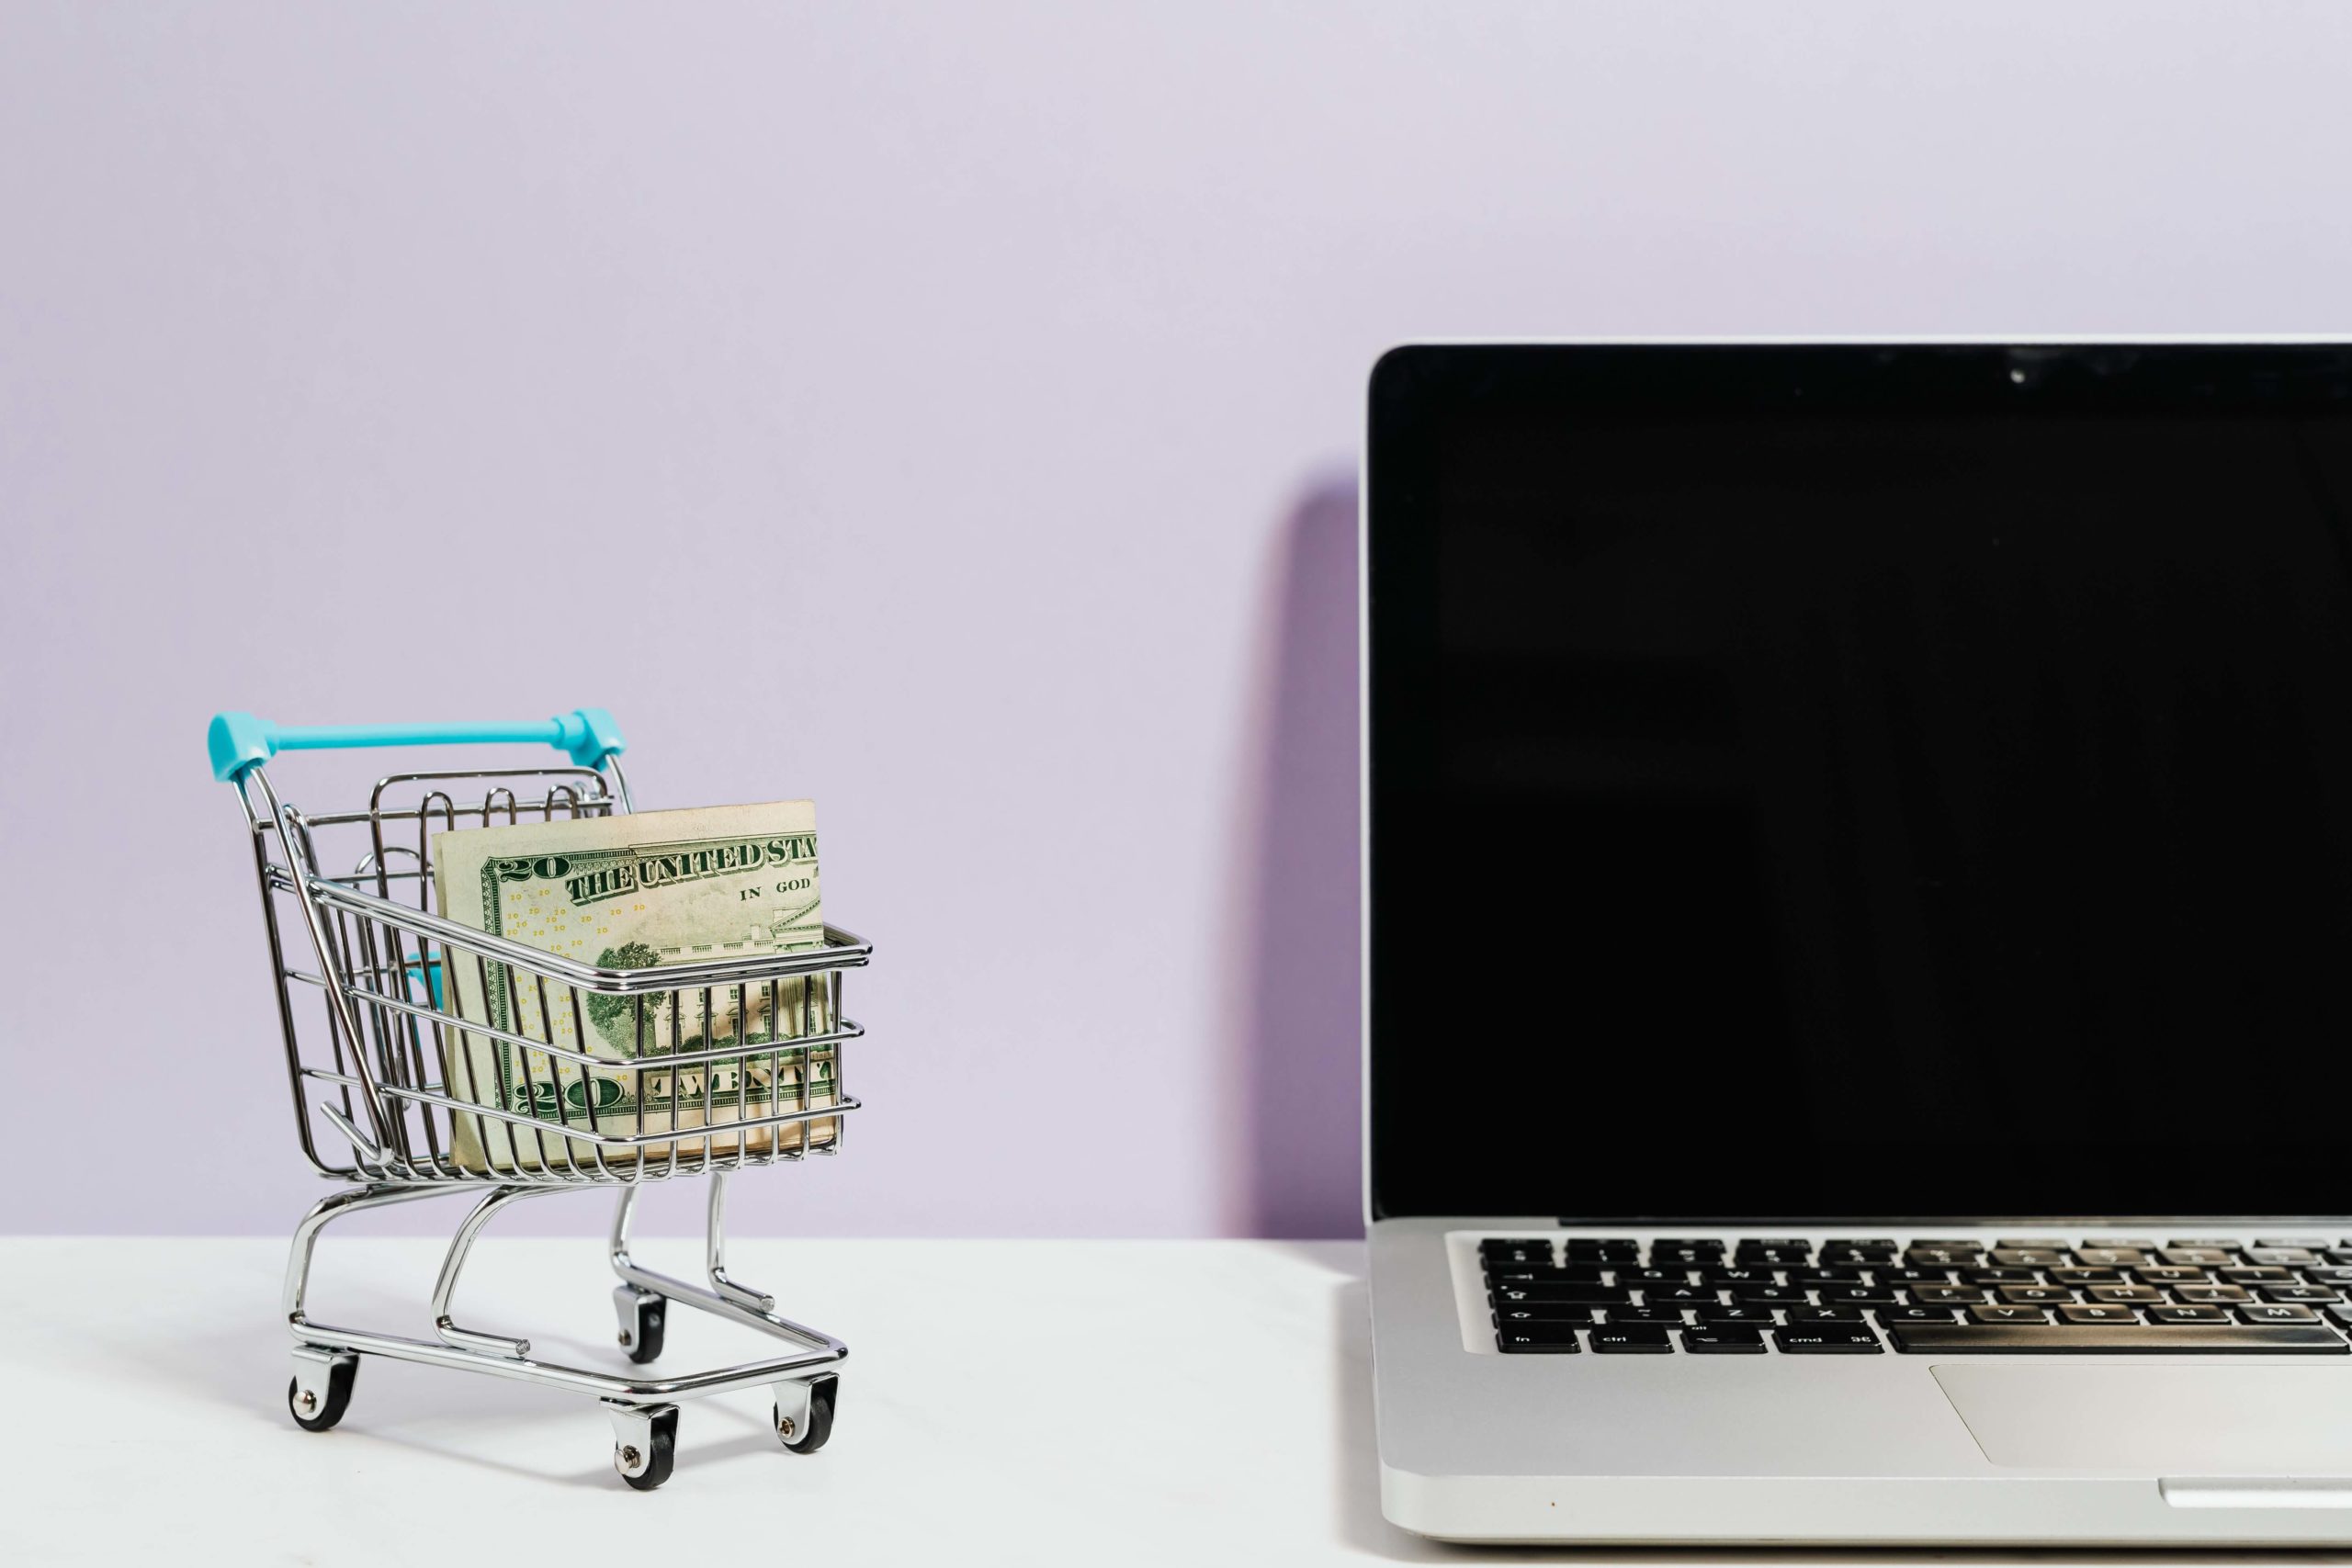 Top ecommerce business challenges and how to address them